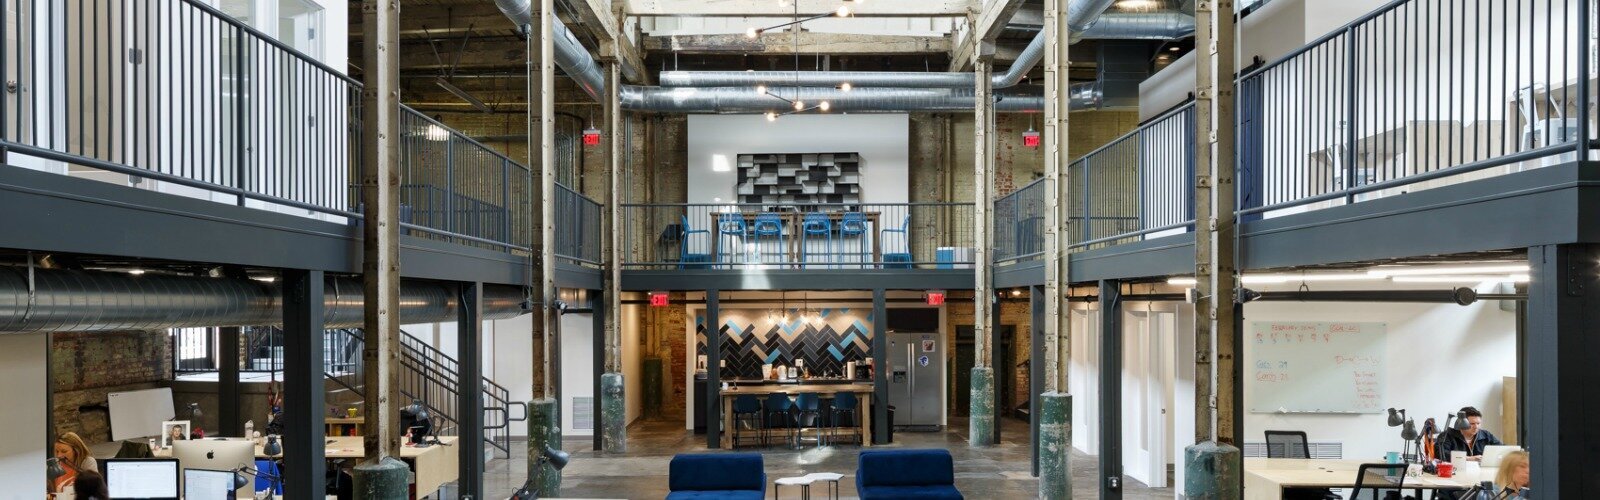 WorK SuperFanU offices demonstrate an adaptive reuse of a historic structure.